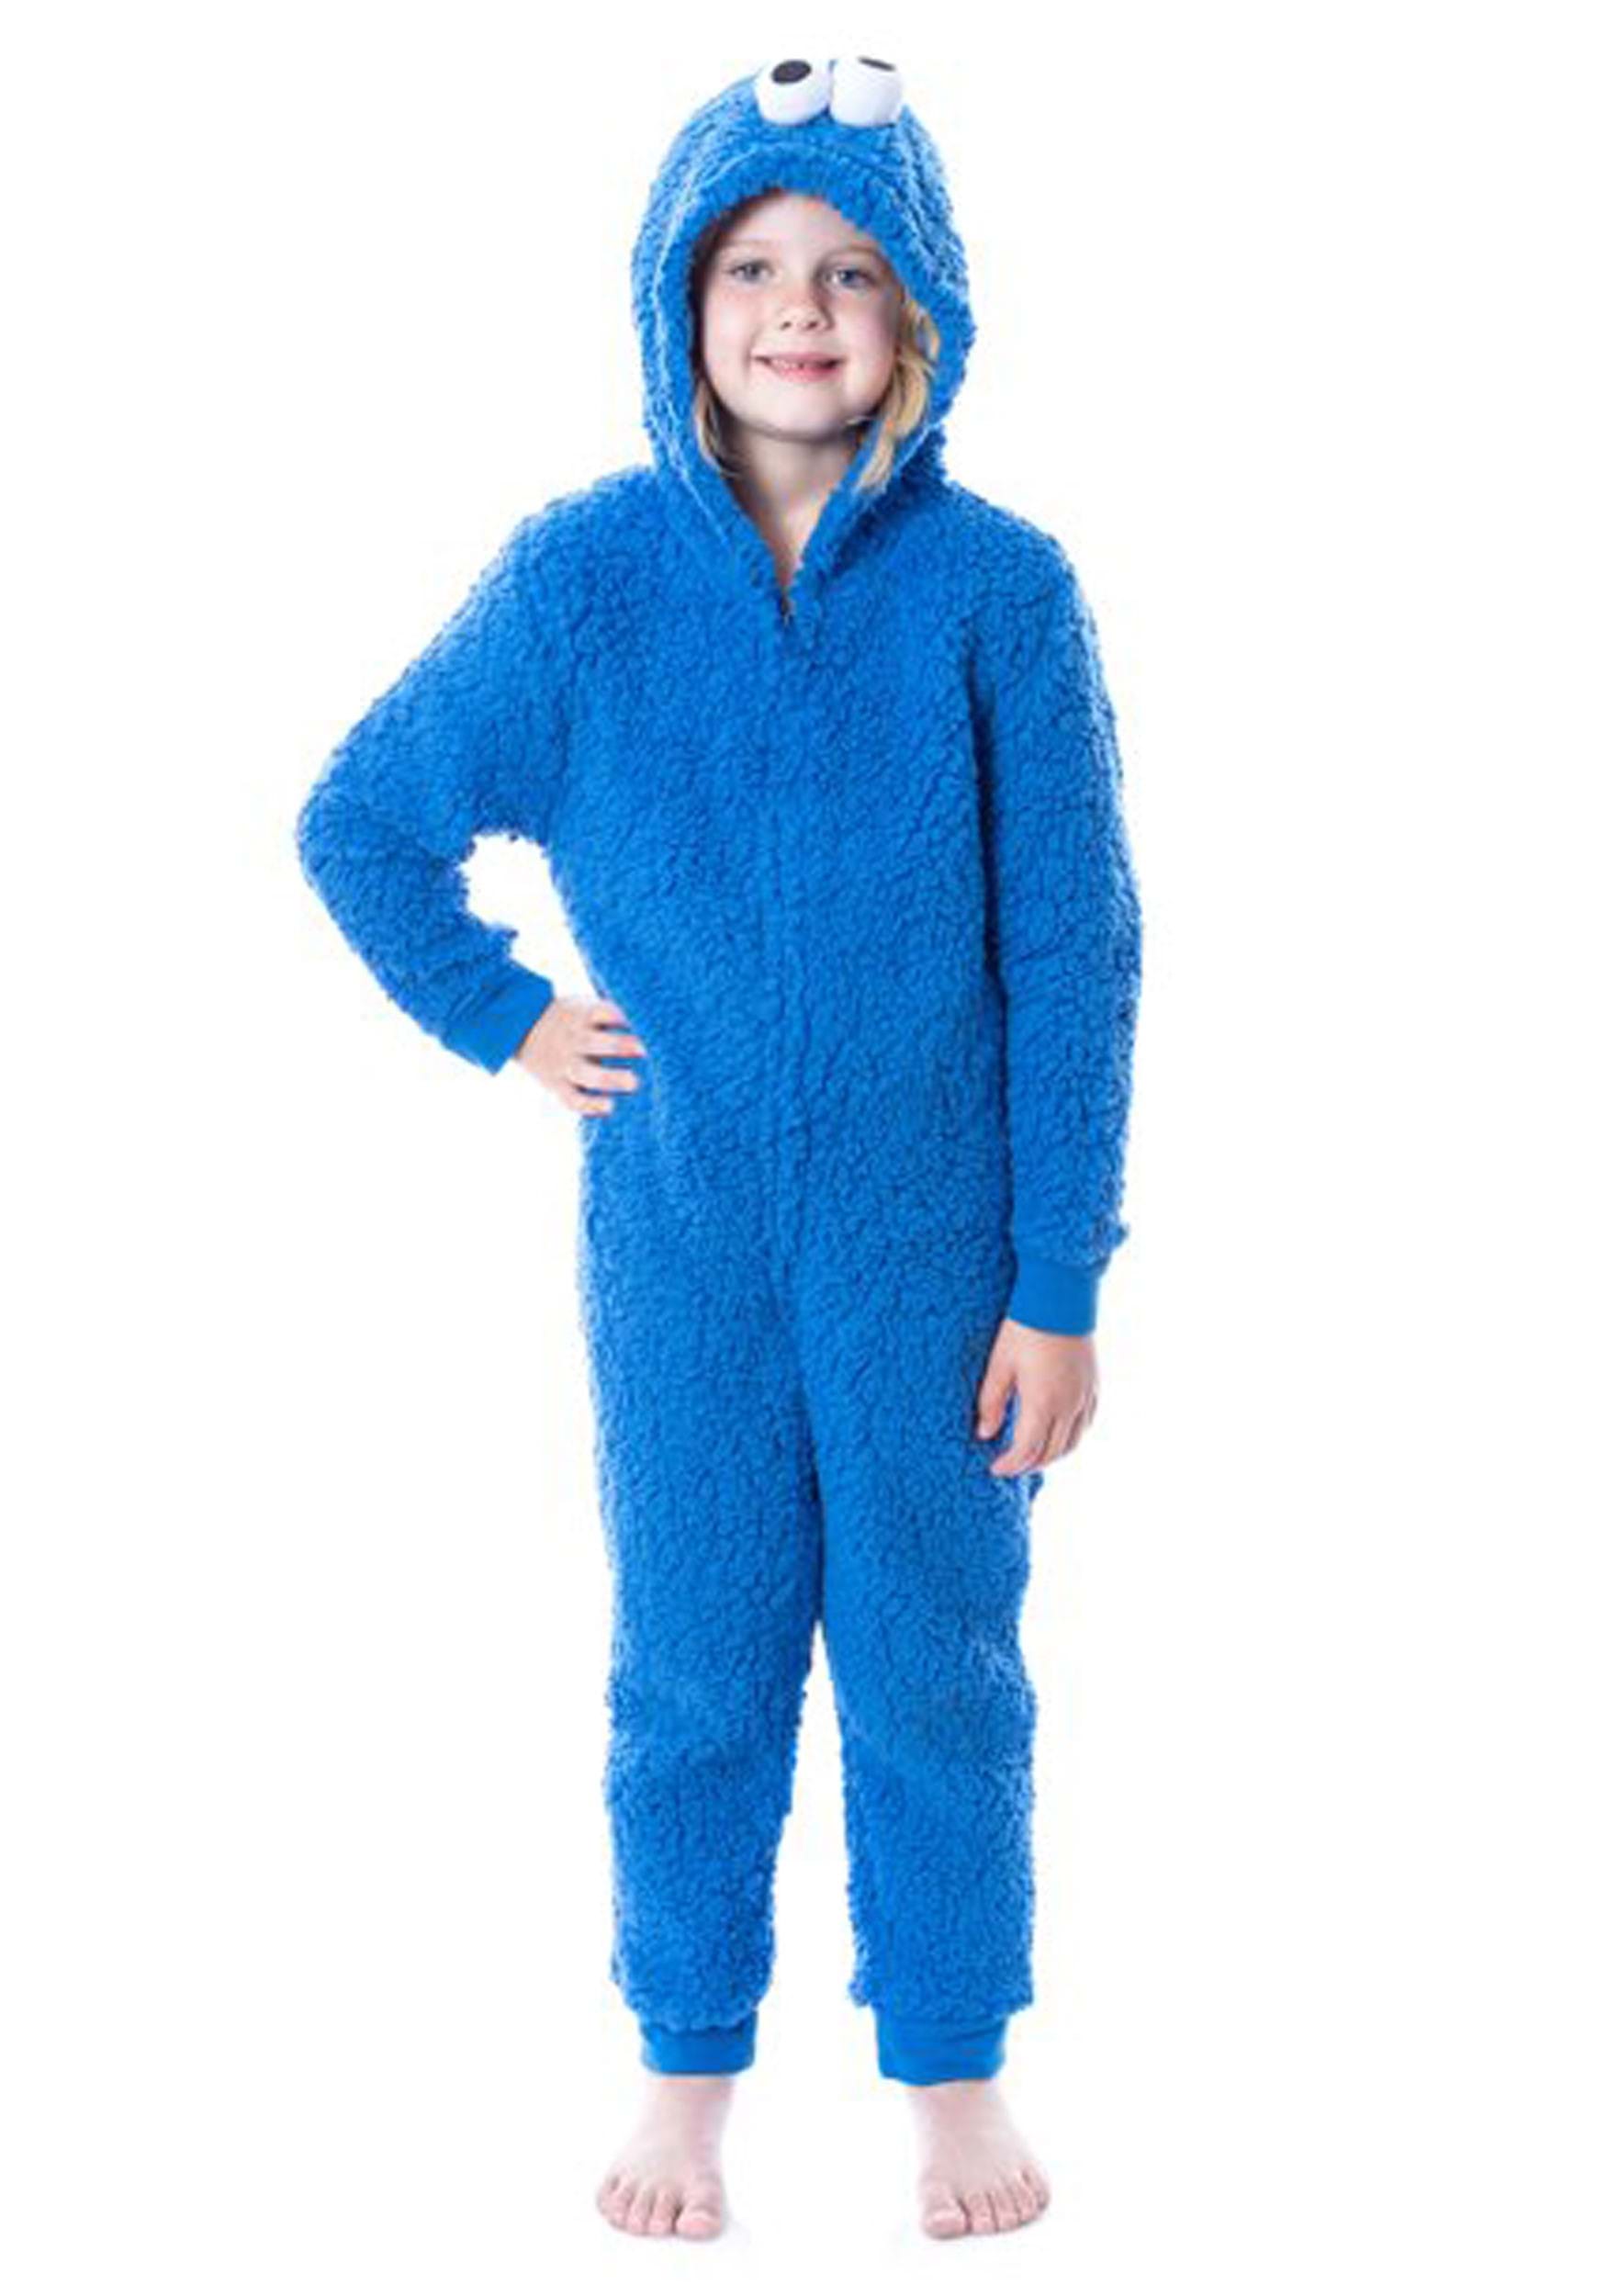 Cookie Monster Union Suit for Toddlers